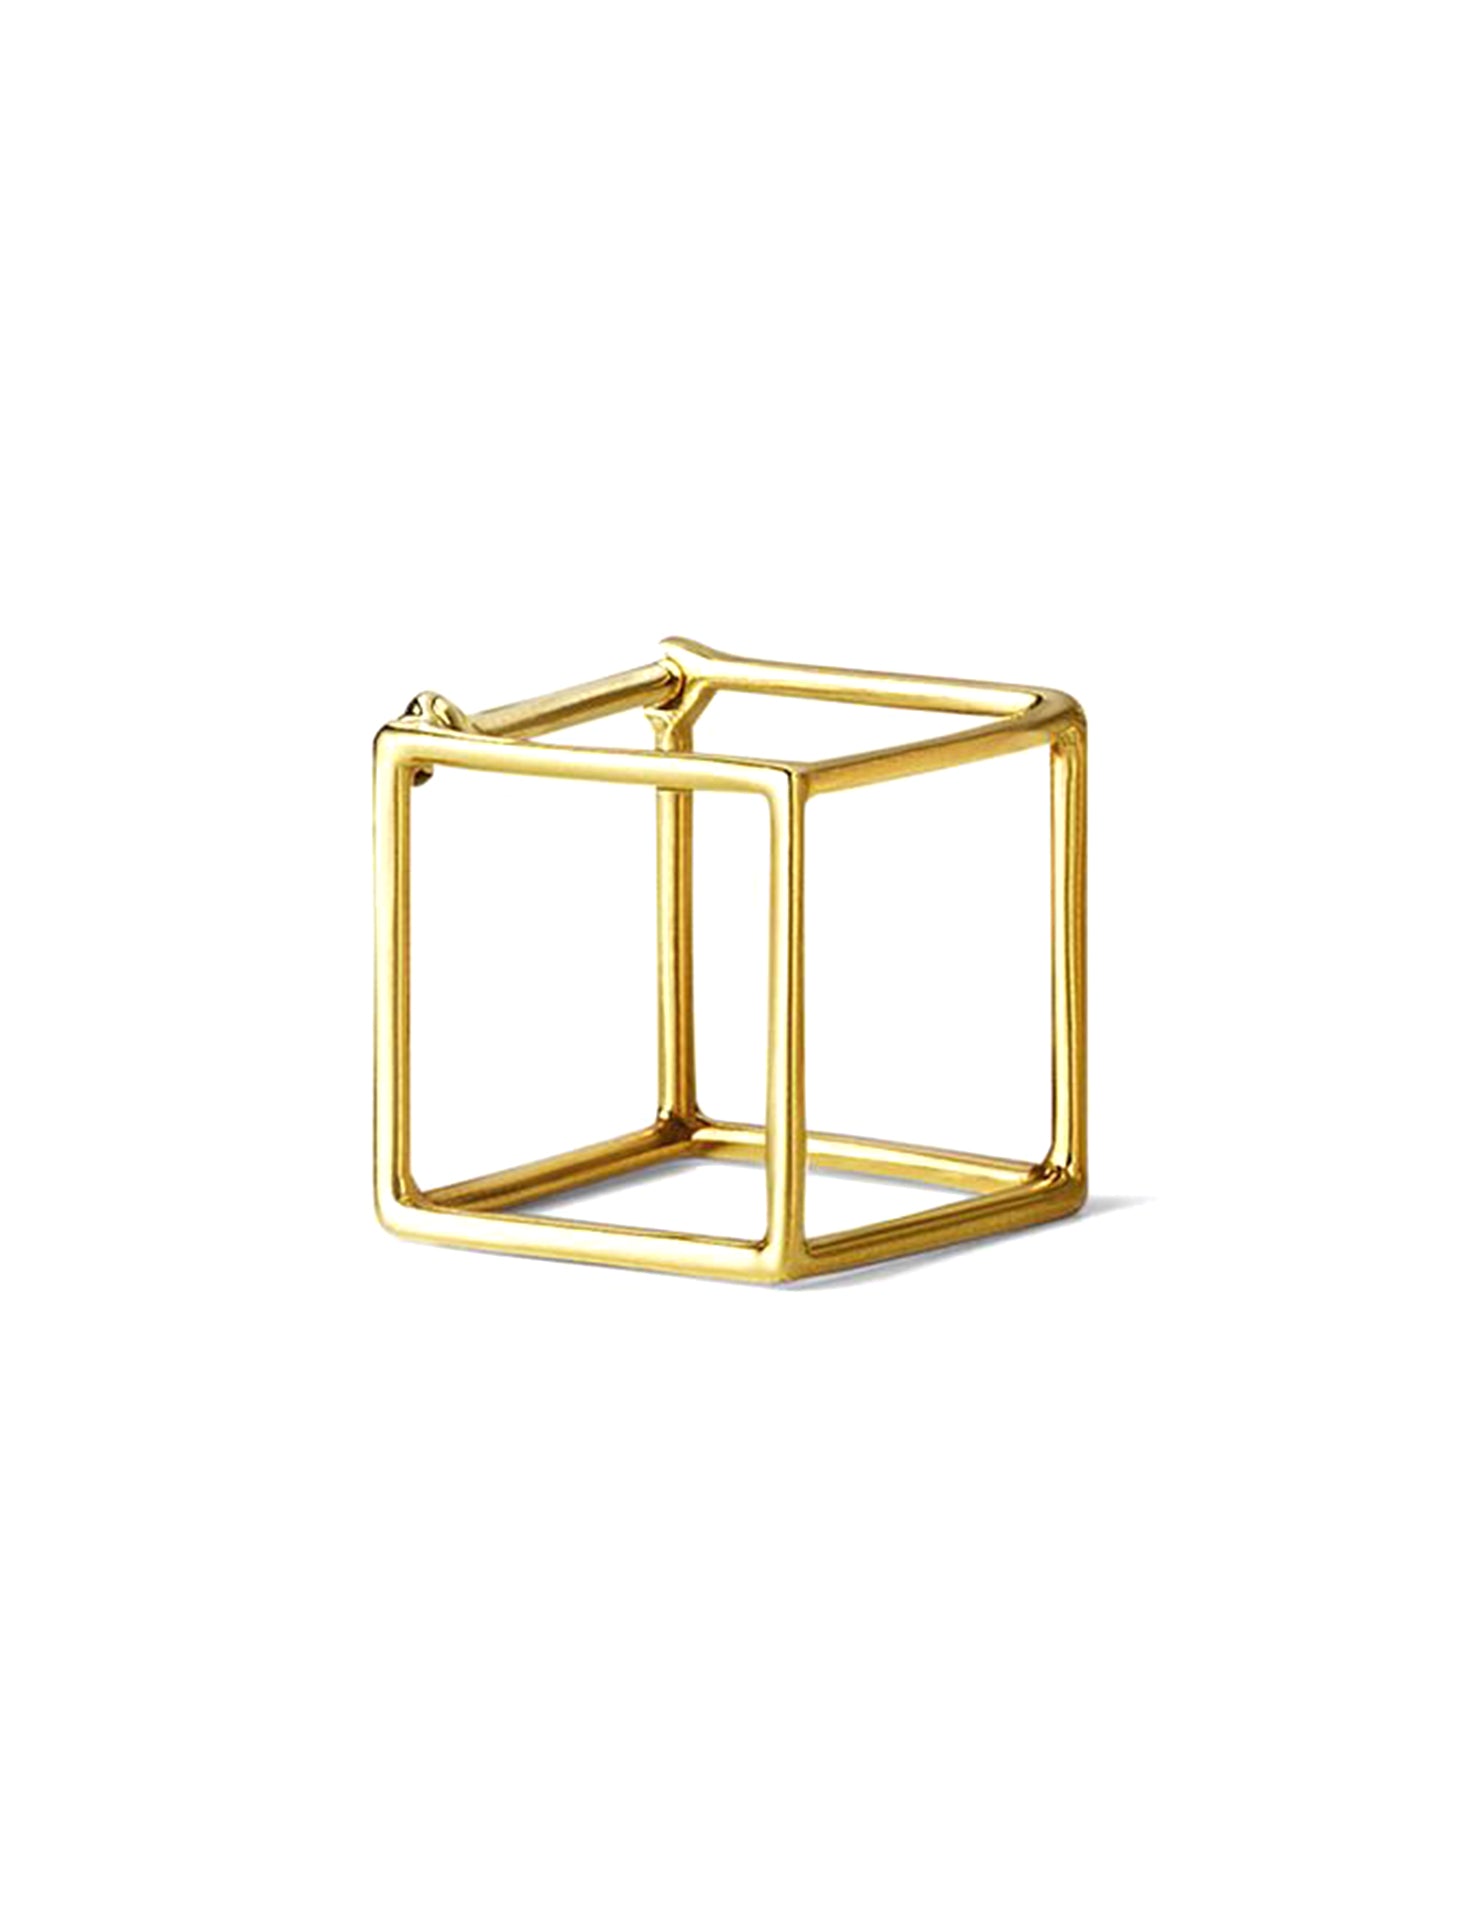 3D Square, 18K Yellow Gold Earring, Small